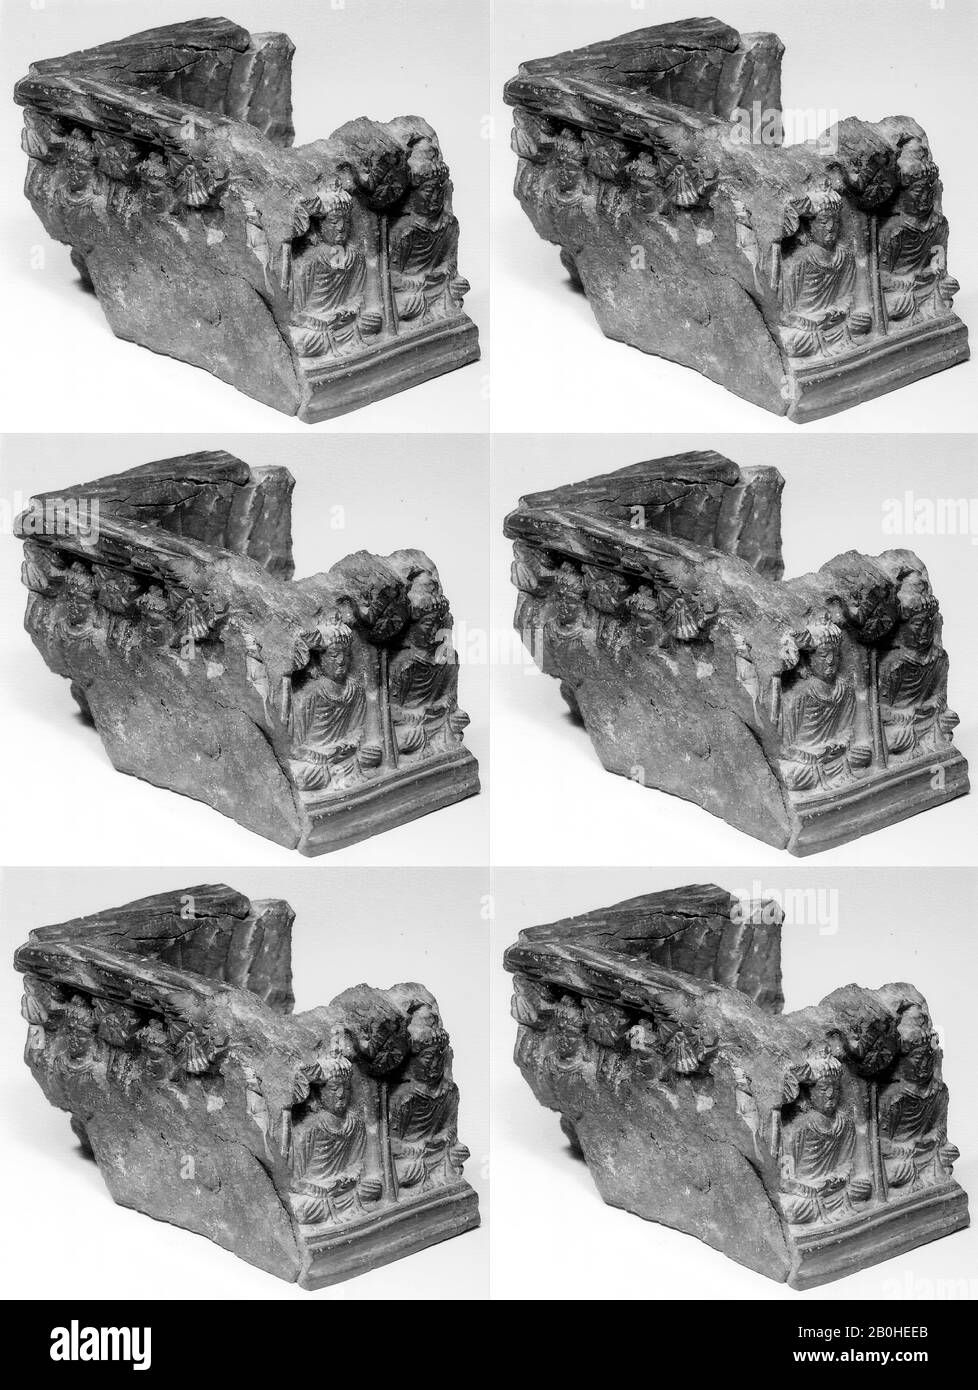 Fragment of a Box, Pakistan (ancient region of Gandhara), ca. 5th century, Pakistan (ancient region of Gandhara), Stone, Gr. H. 1 15/16 in. (4.9 cm), Sculpture Stock Photo